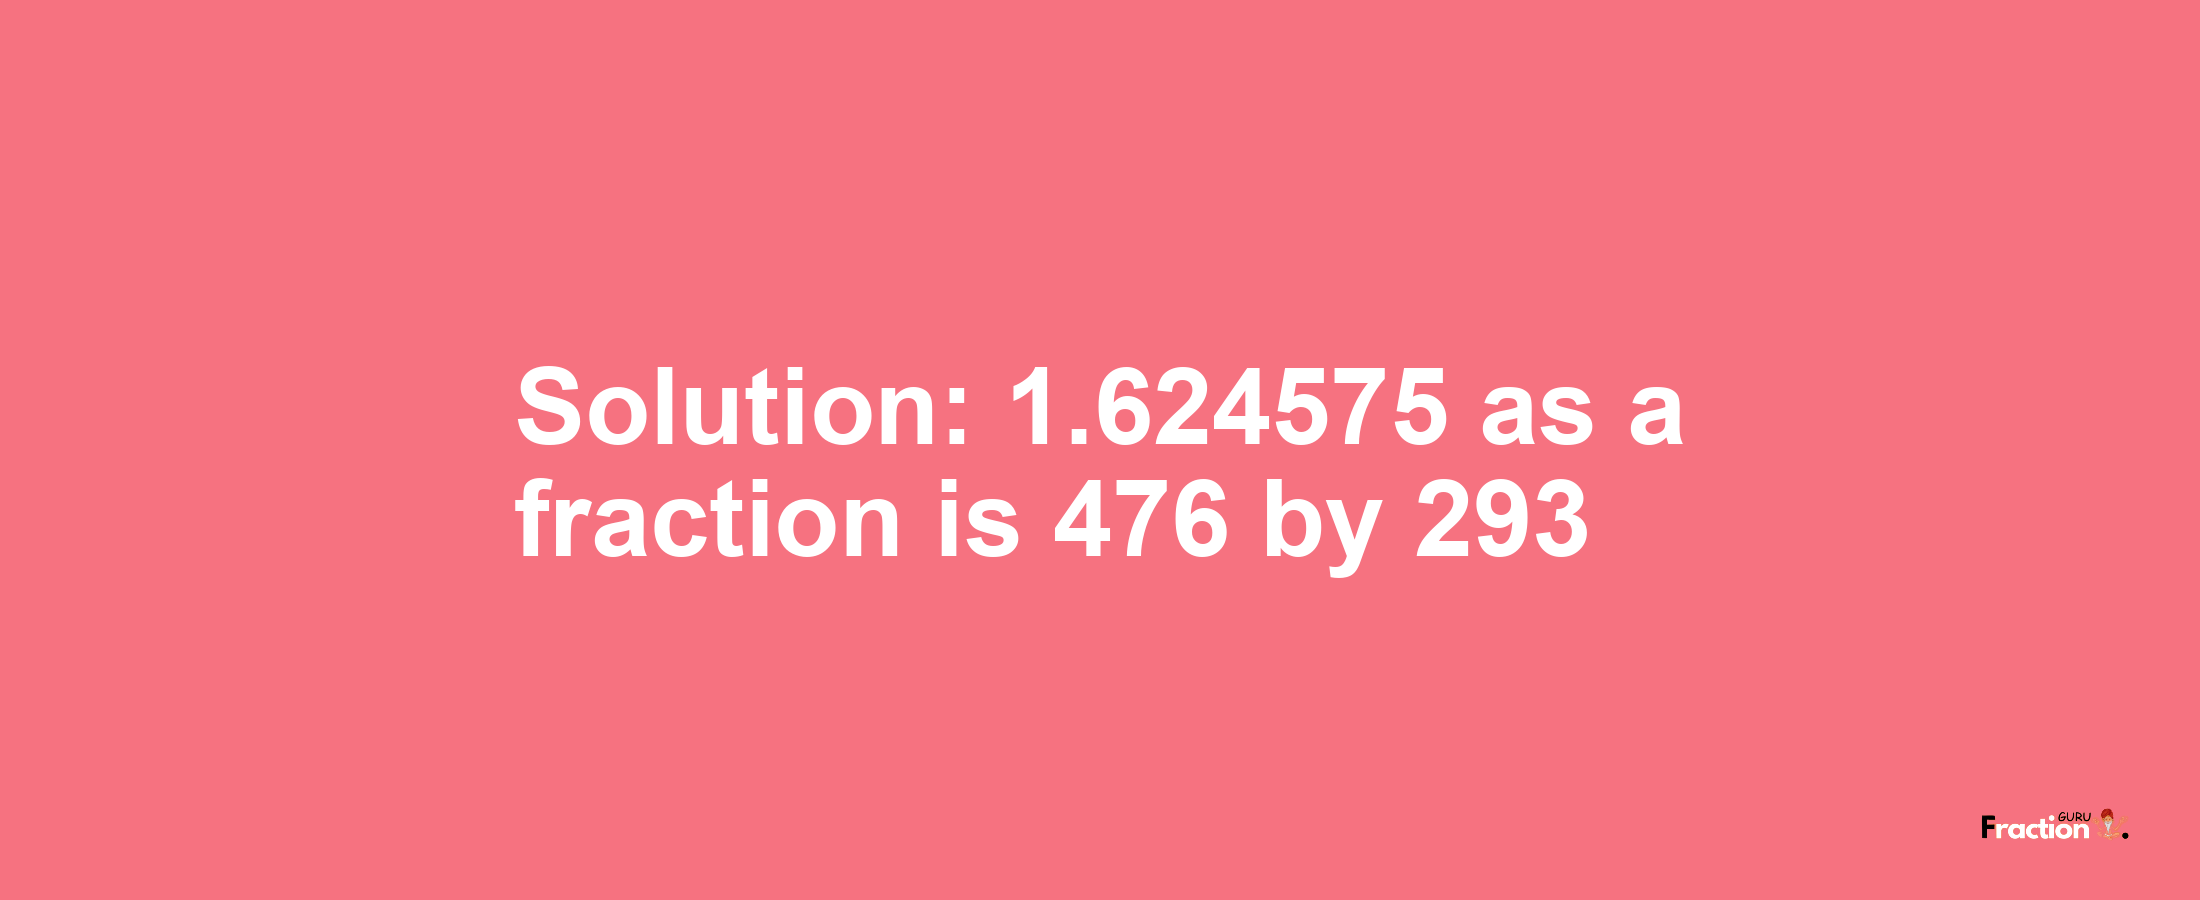 Solution:1.624575 as a fraction is 476/293